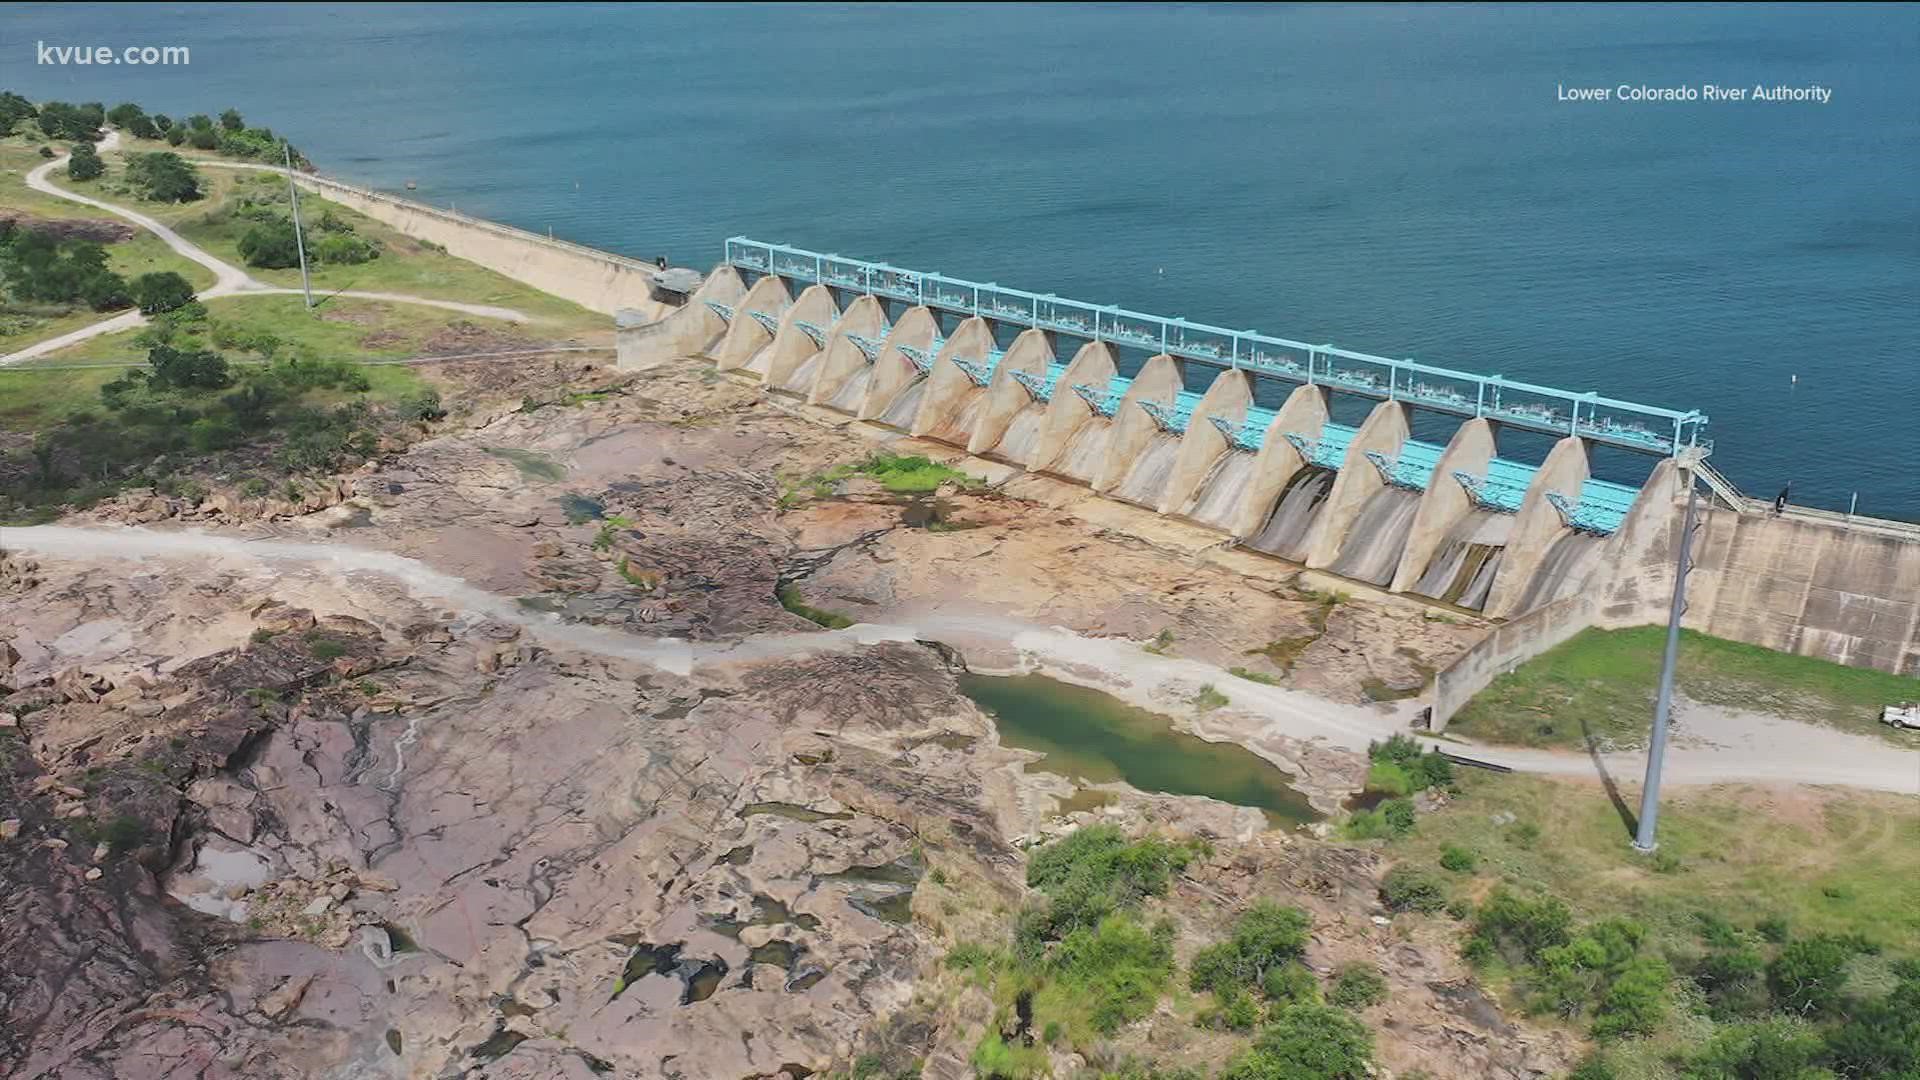 Lake levels are rising in Central Texas, so the Lower Colorado River Authority (LCRA) is scaling back its drought response.